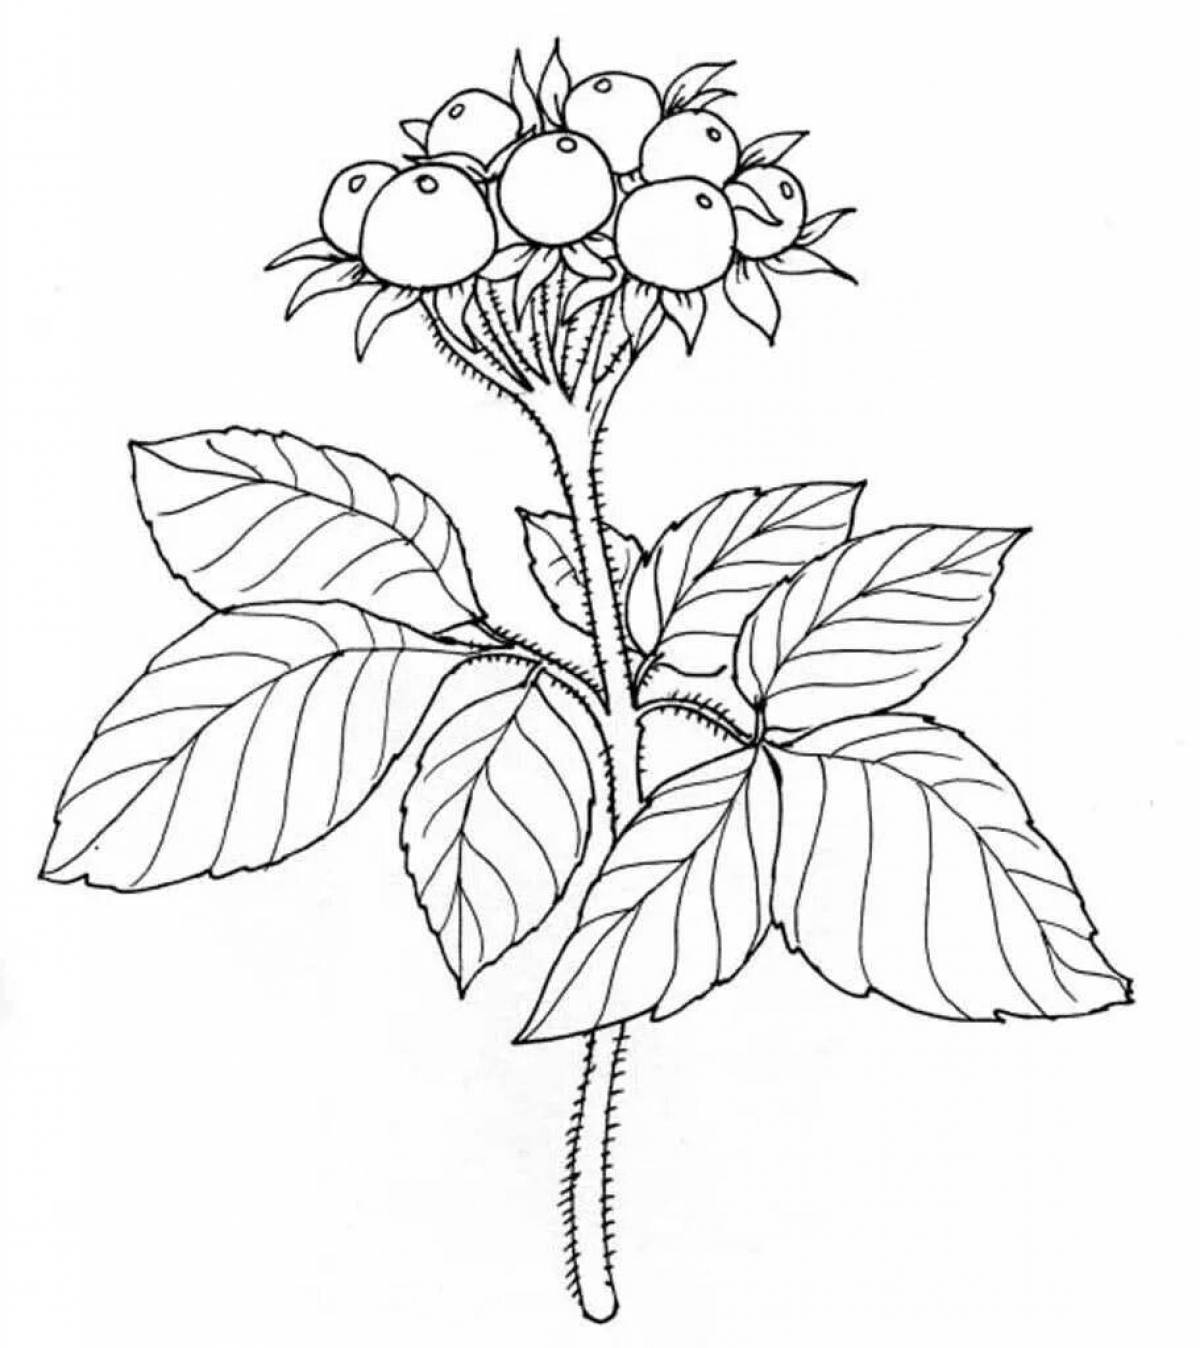 Coloring book for kids with alluring poisonous plants